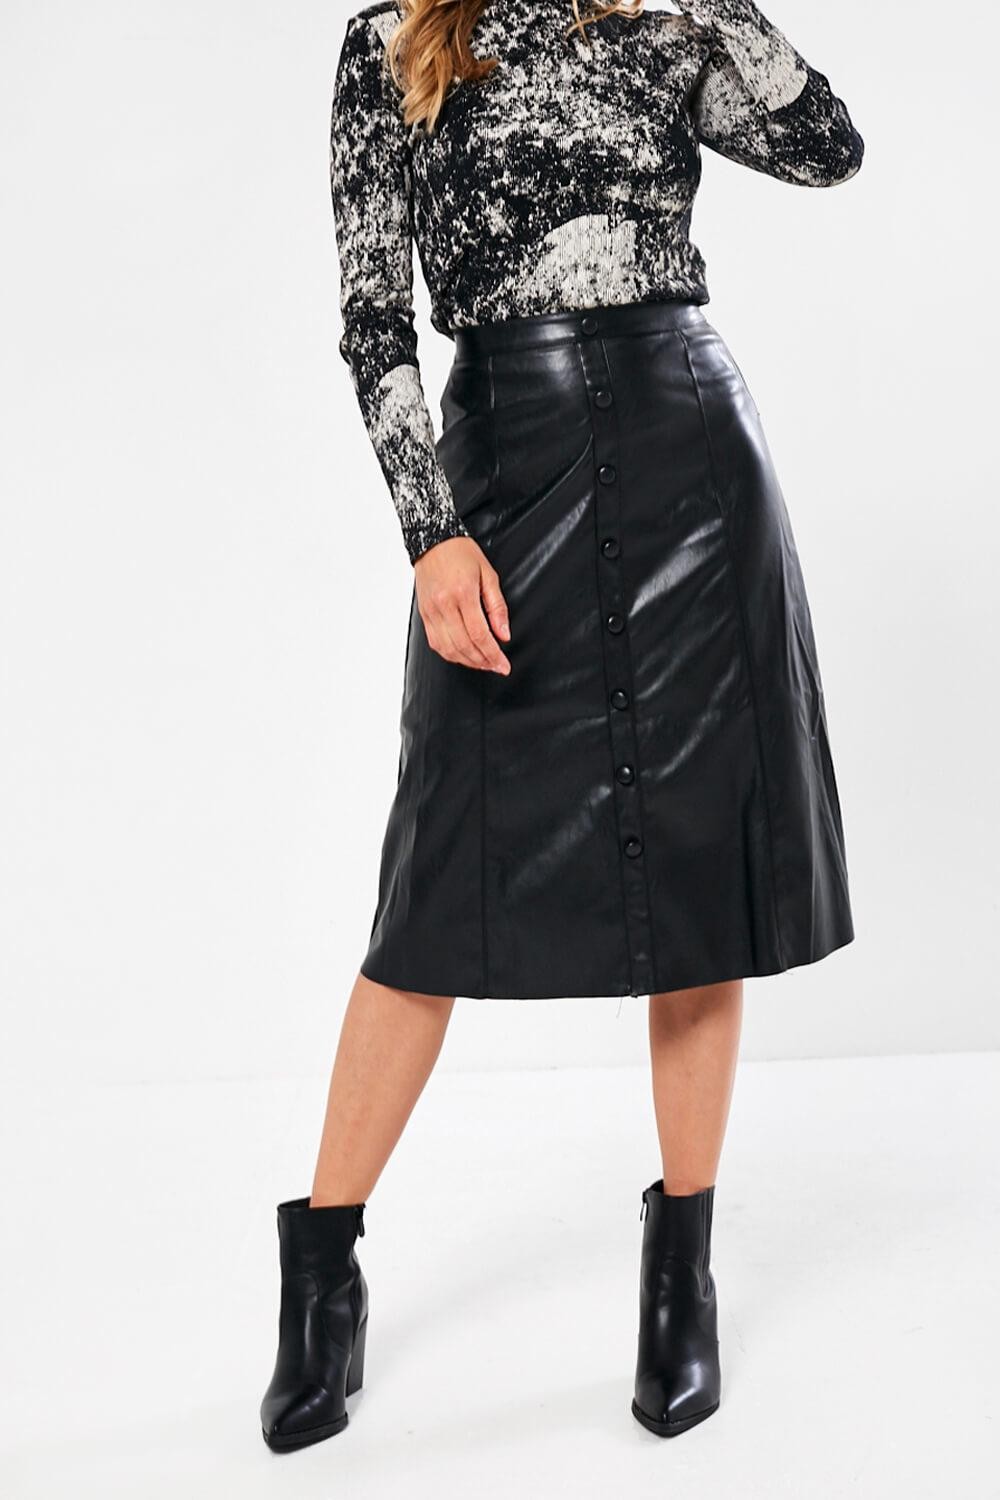 Marc Angelo Gill A-Line Faux Leather Midi Skirt in Black | iCLOTHING